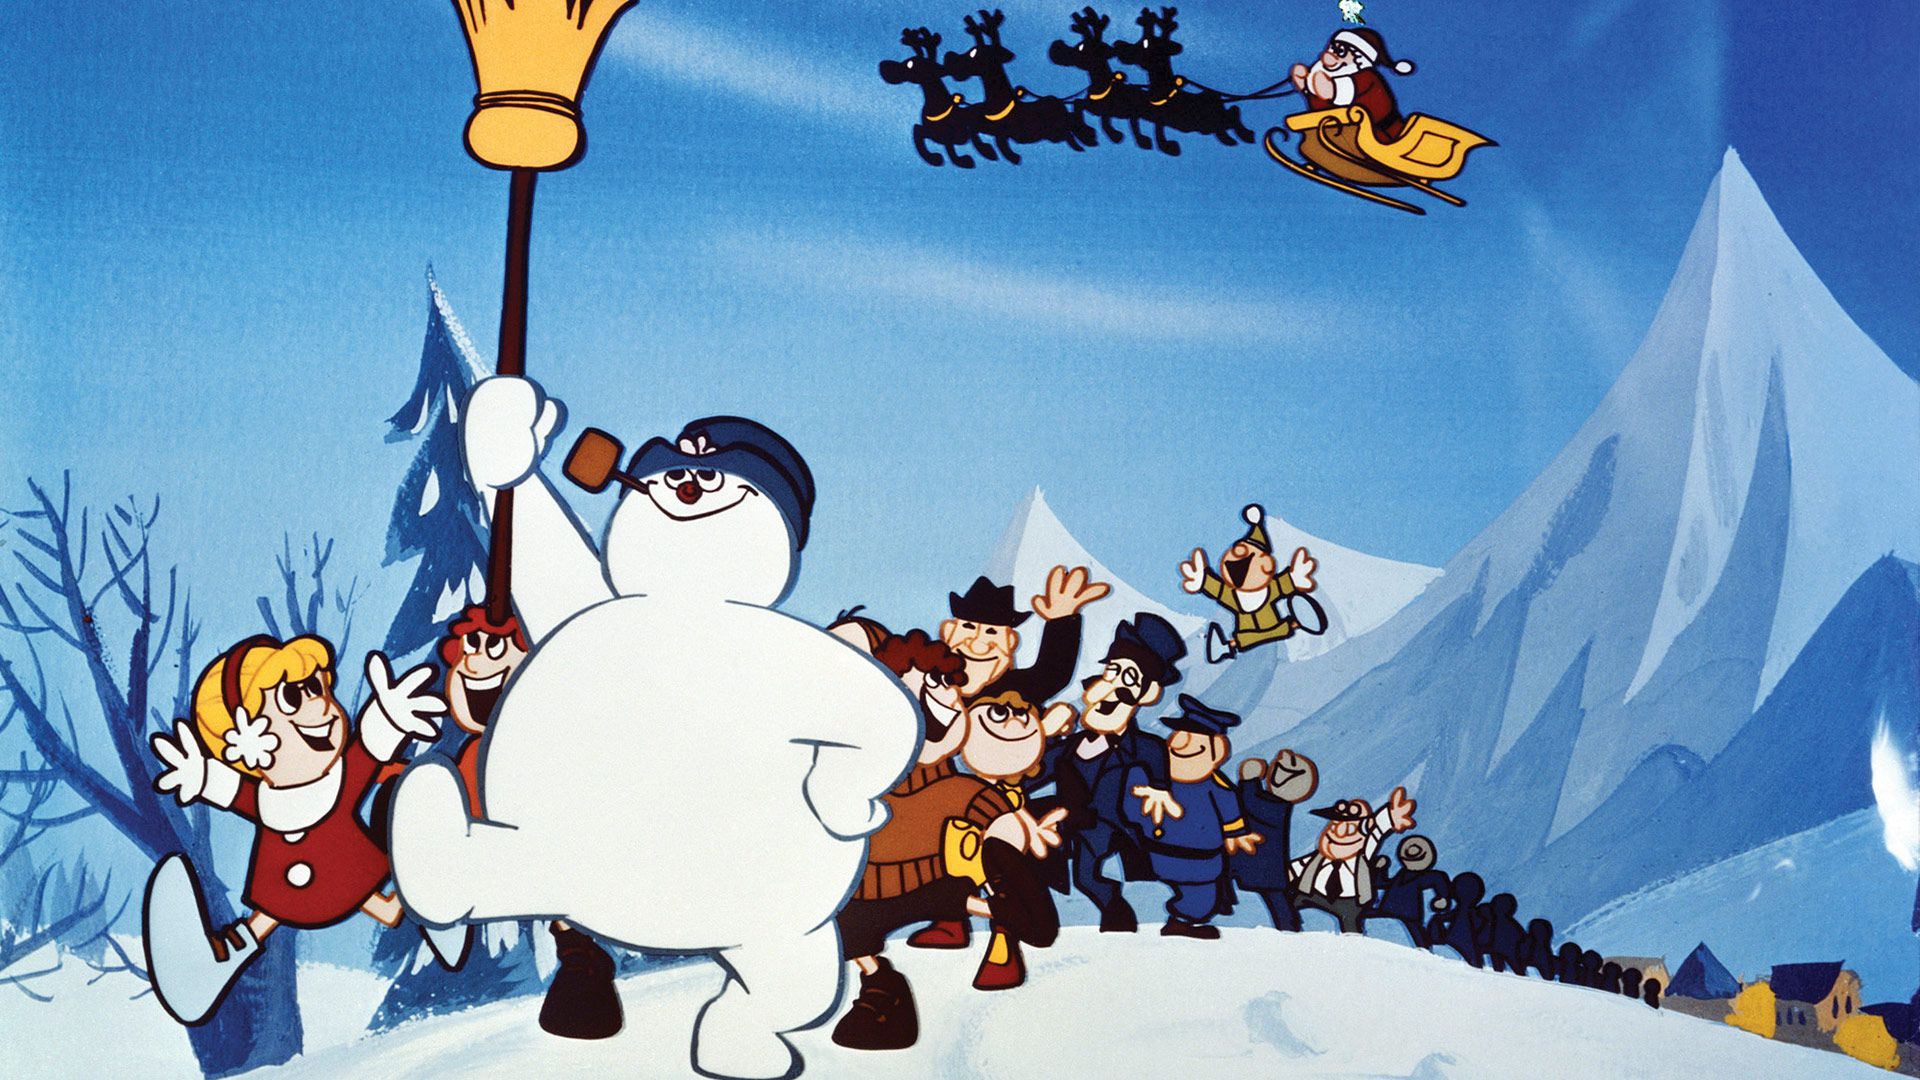 Frosty the Snowman” airs Friday evening